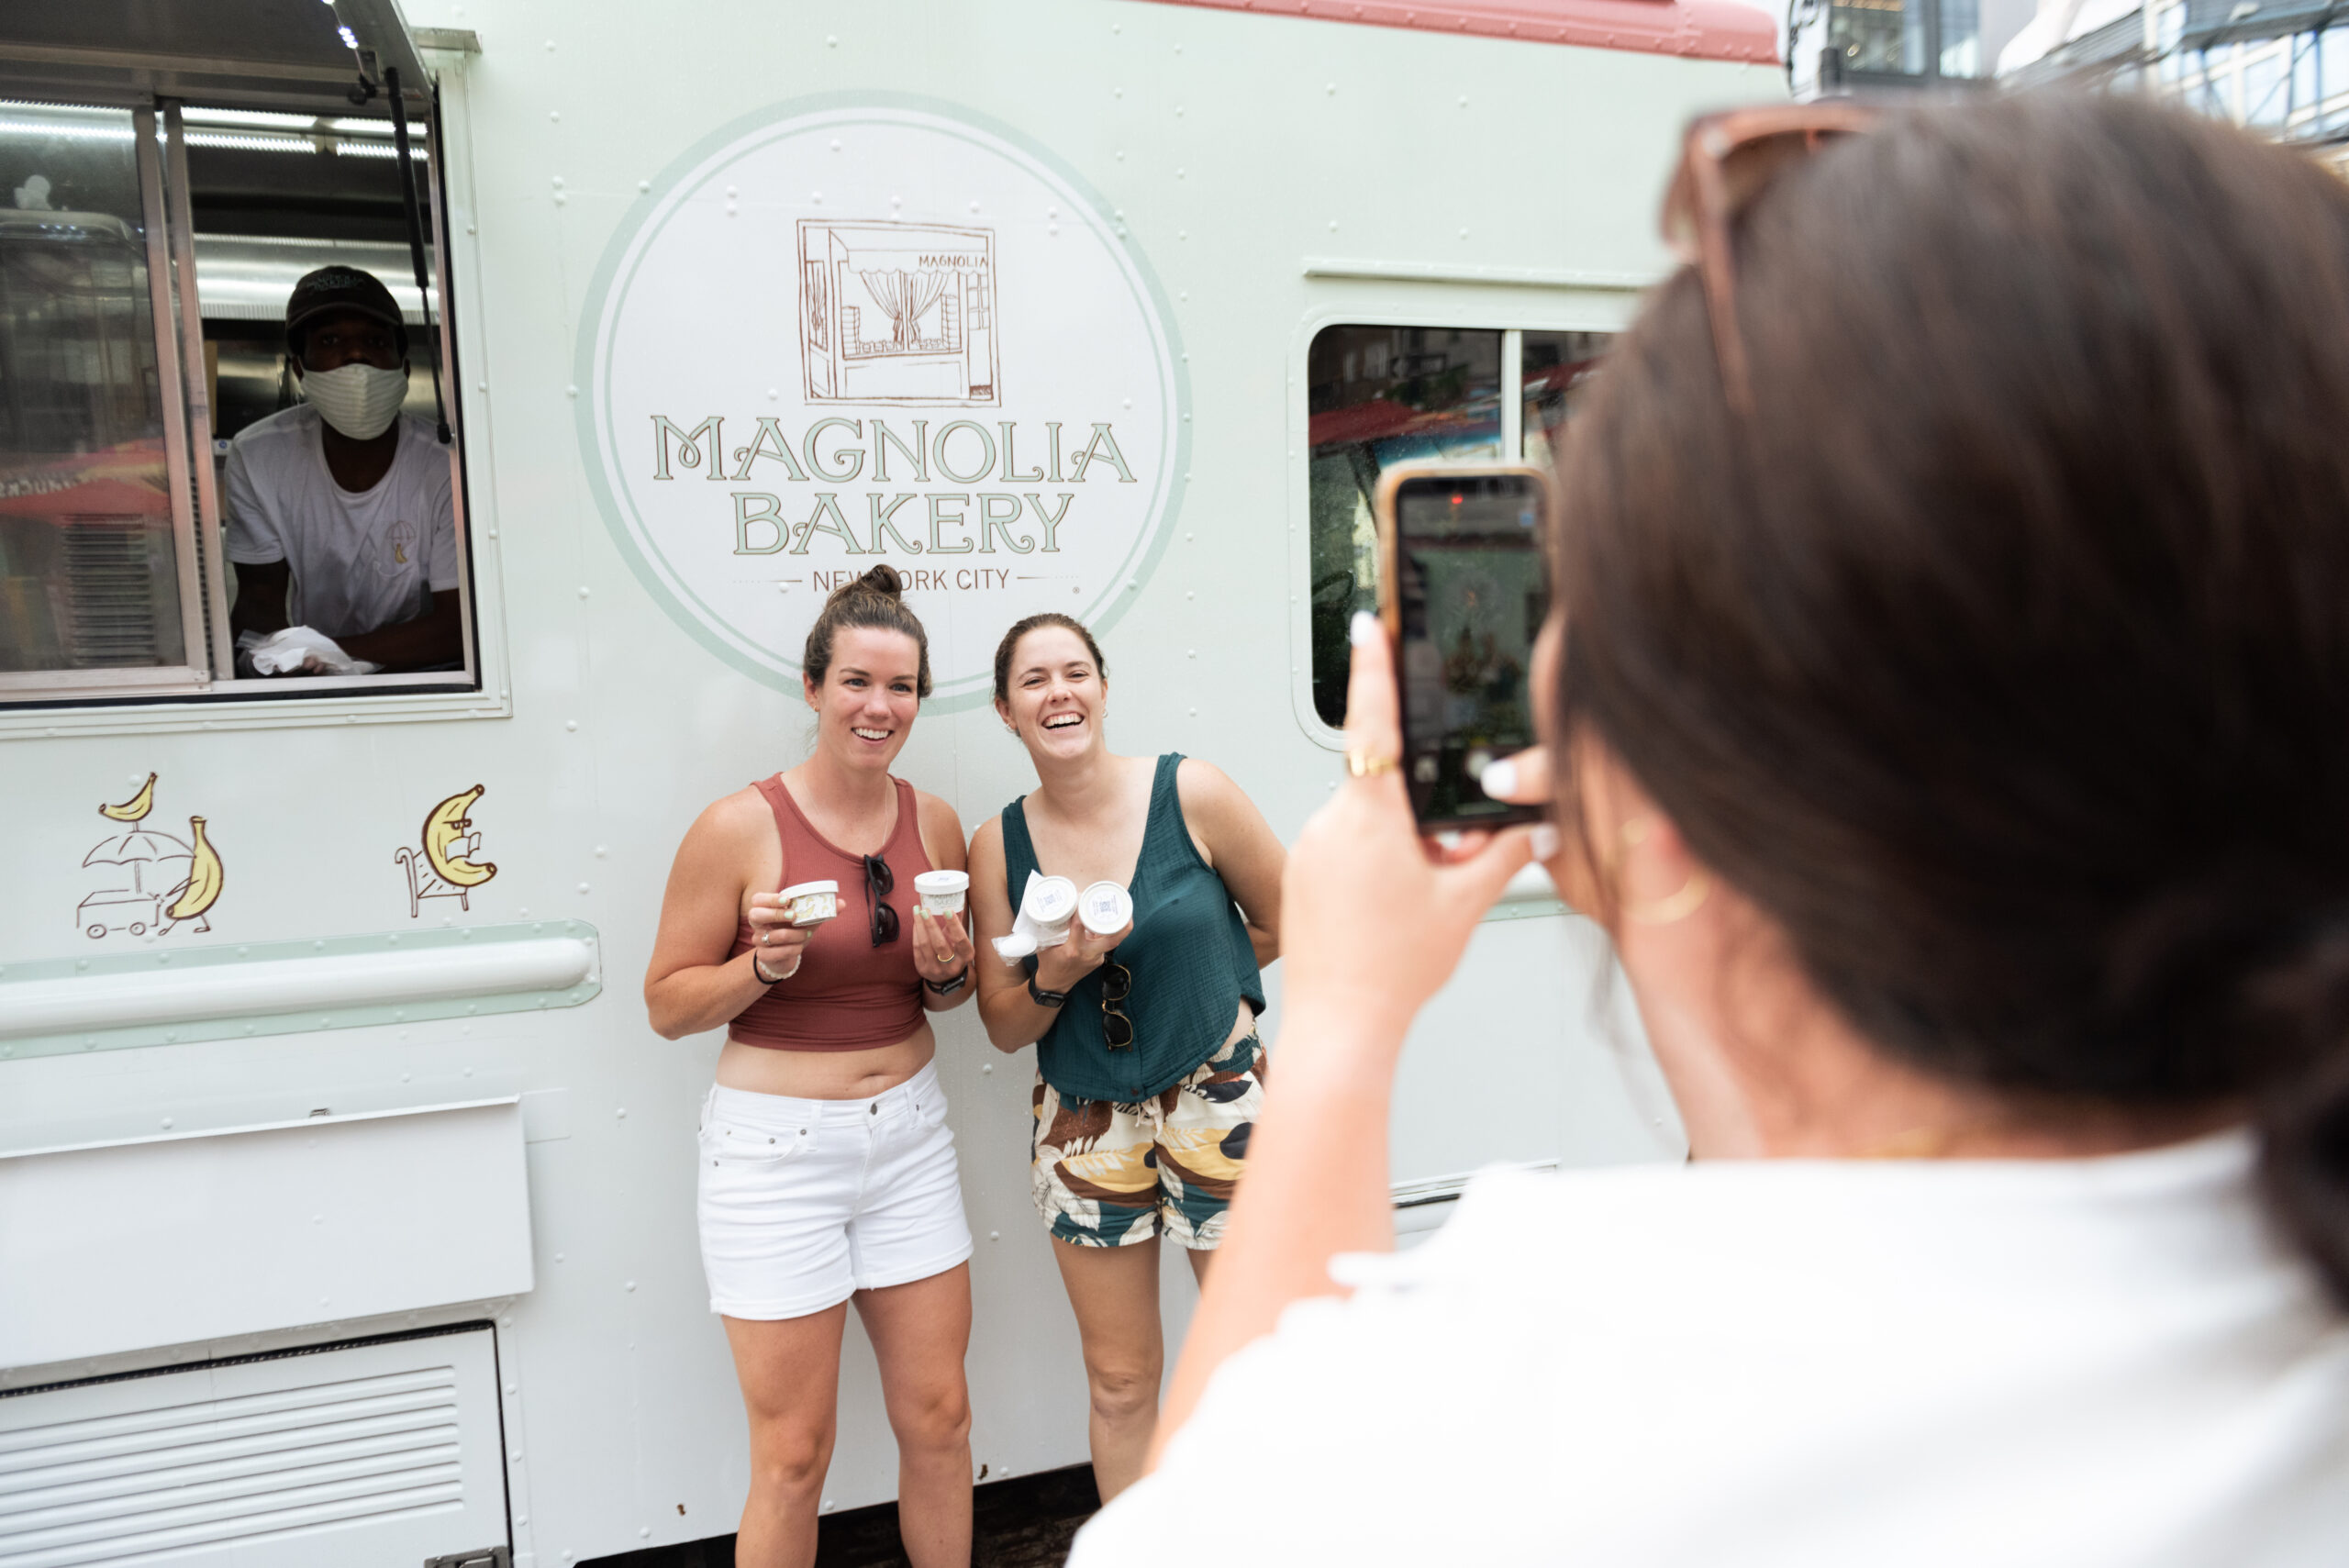 Customers with free banana pudding from Magnolia Bakery food truck